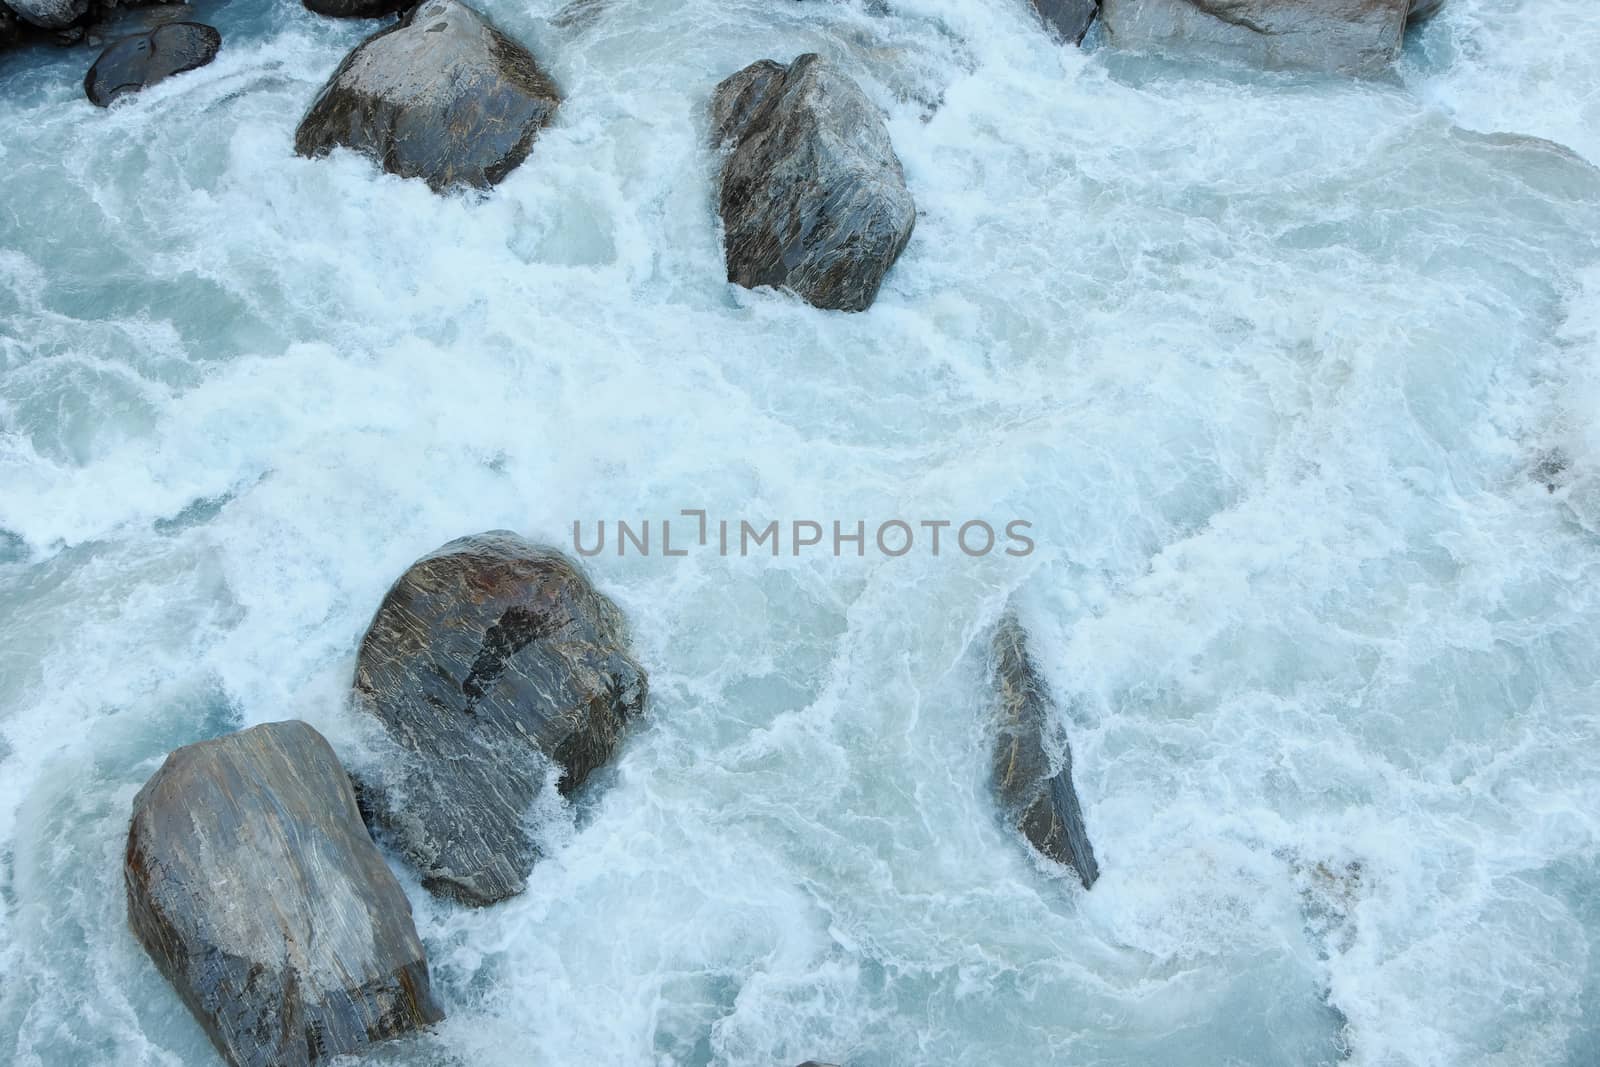 Stormy flow of white water in a mountain river among large boulders 